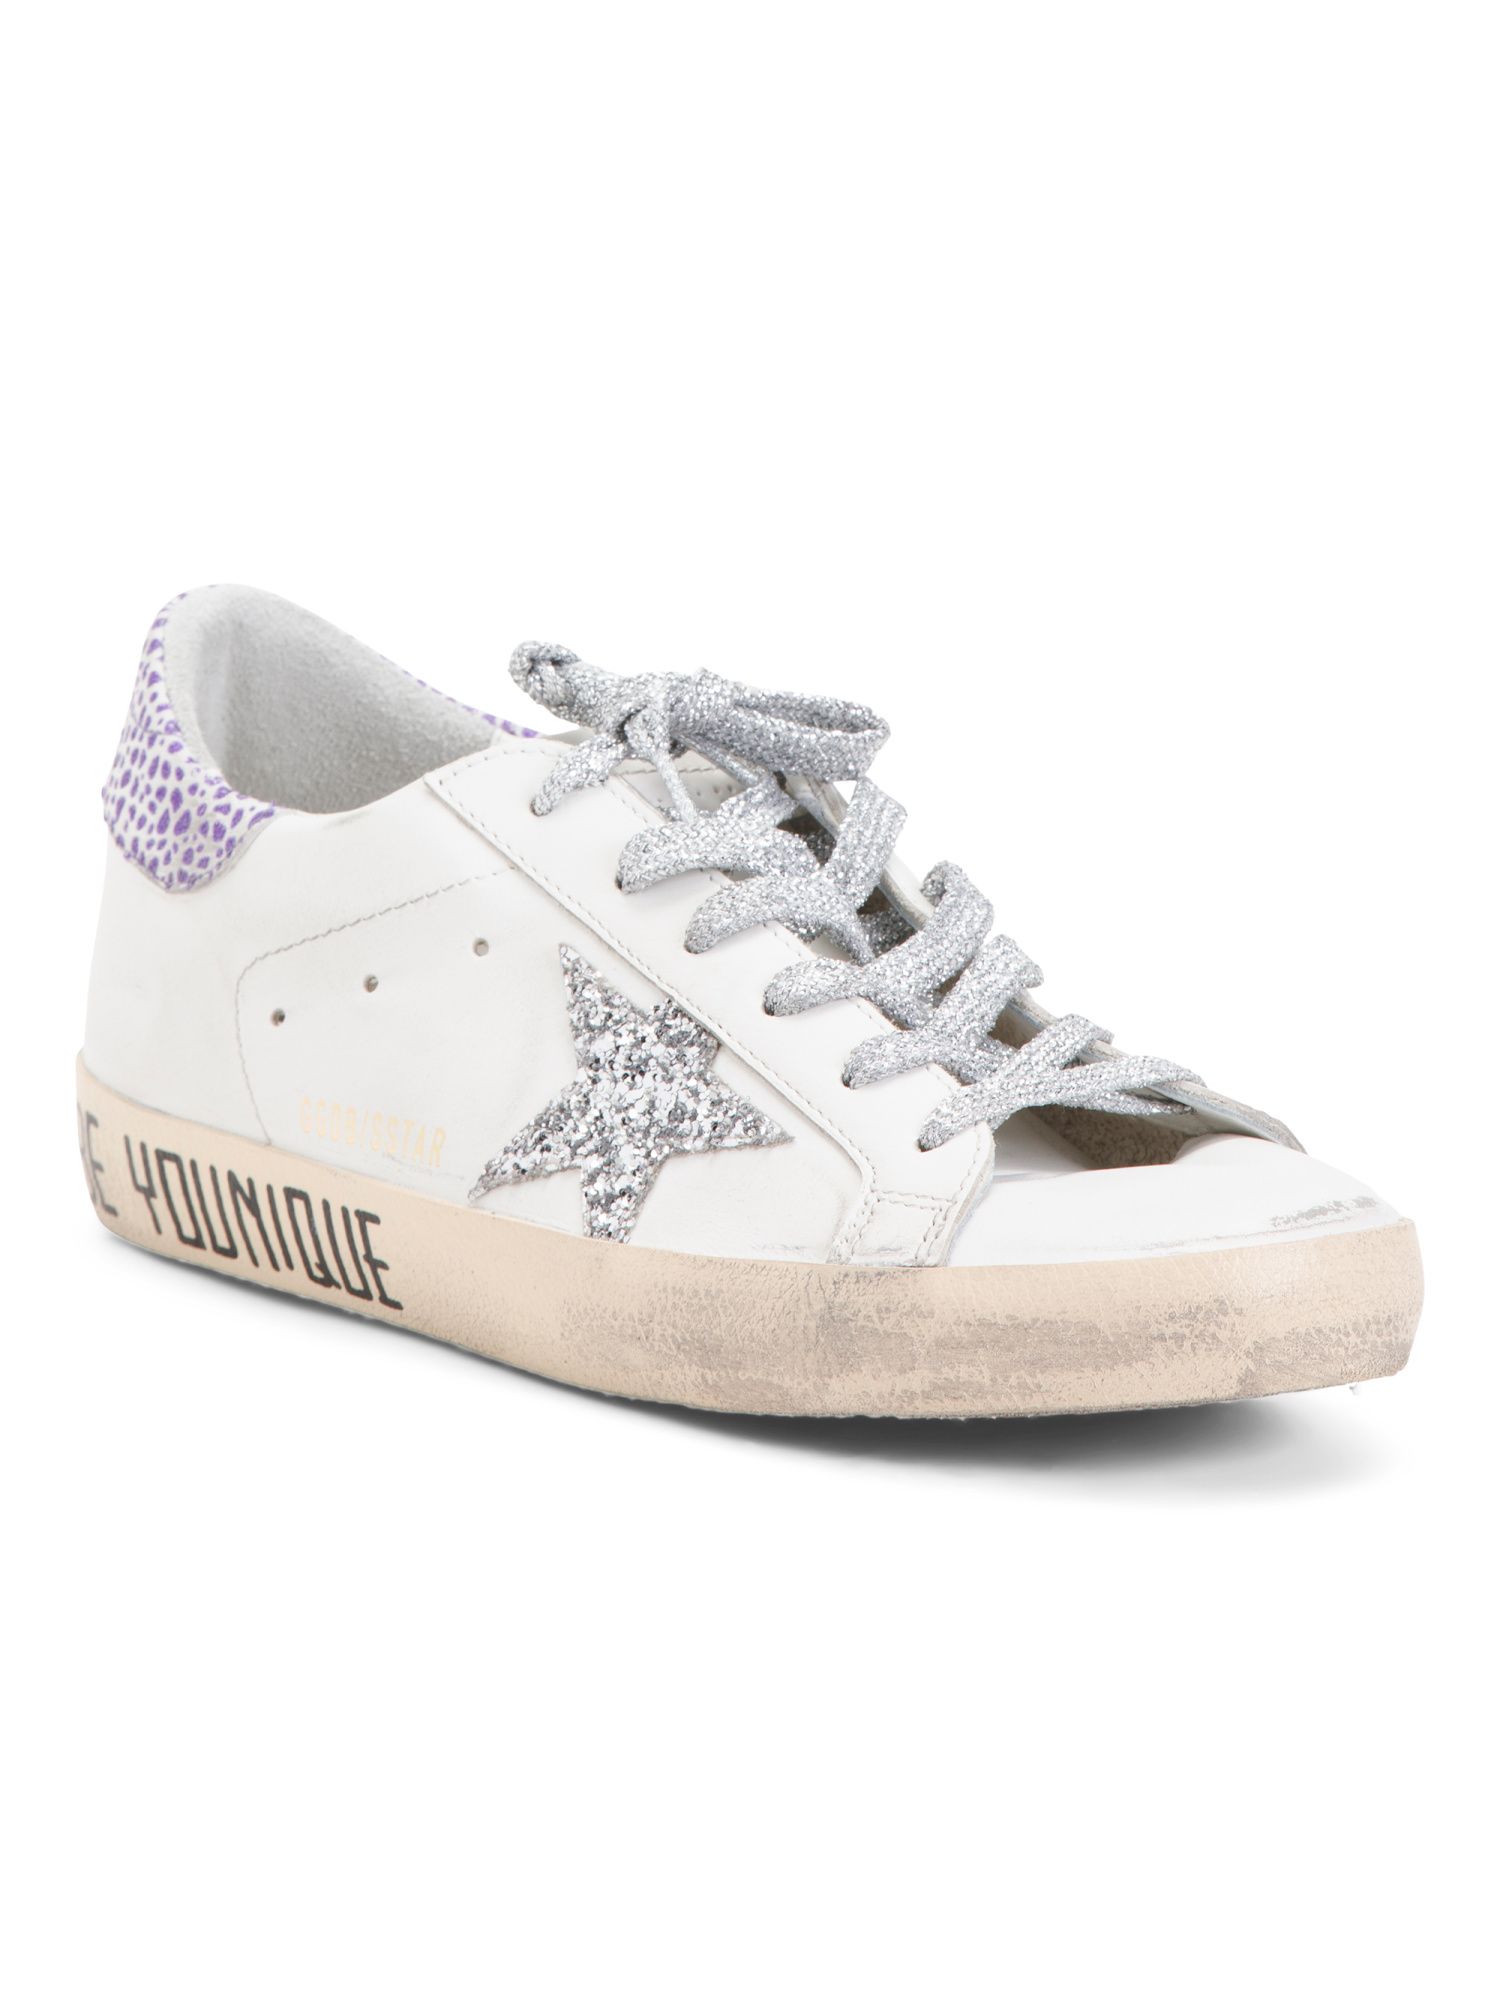 Made In Italy Distressed Sneakers | Women's Shoes | Marshalls | Marshalls